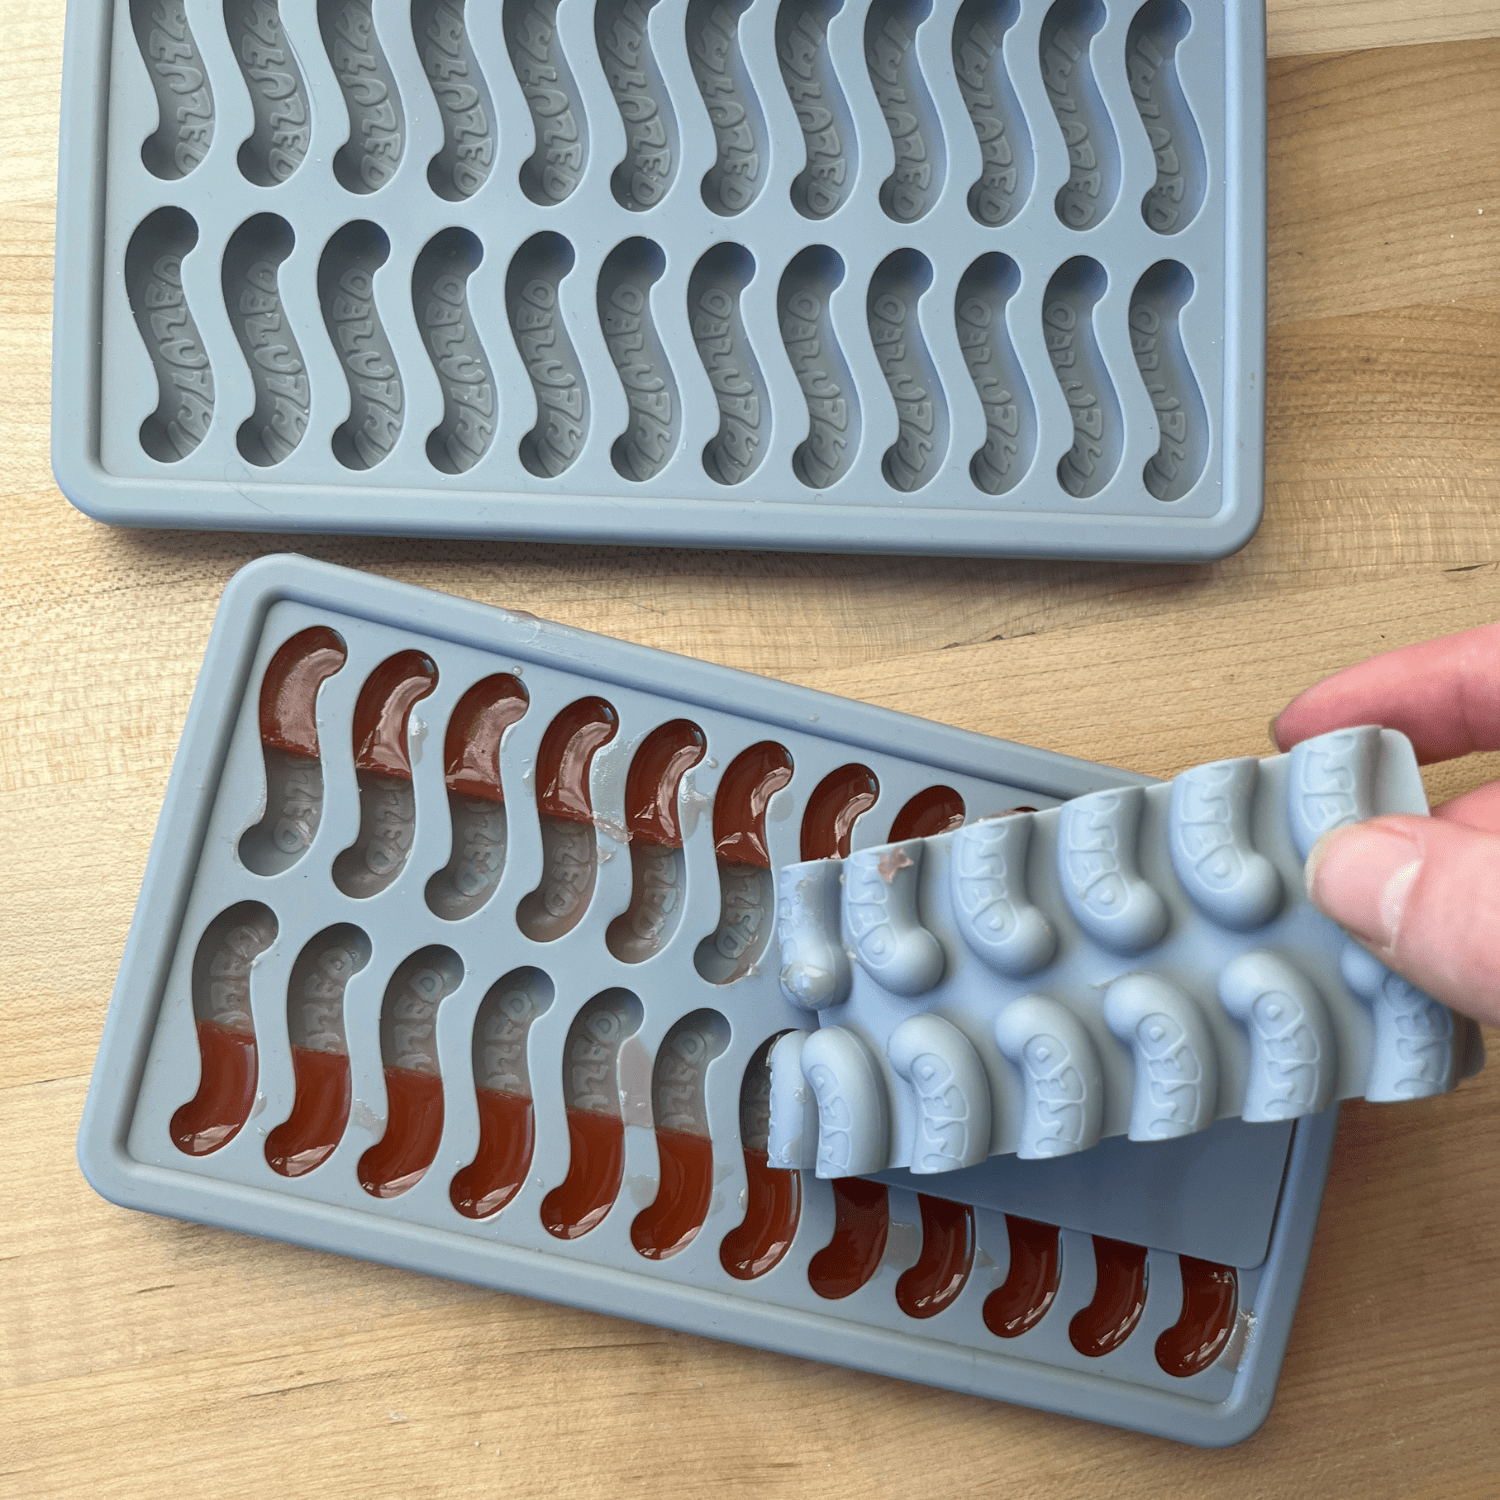 LEVO Gummy Worm Mold with insert divider for two toned gummies.